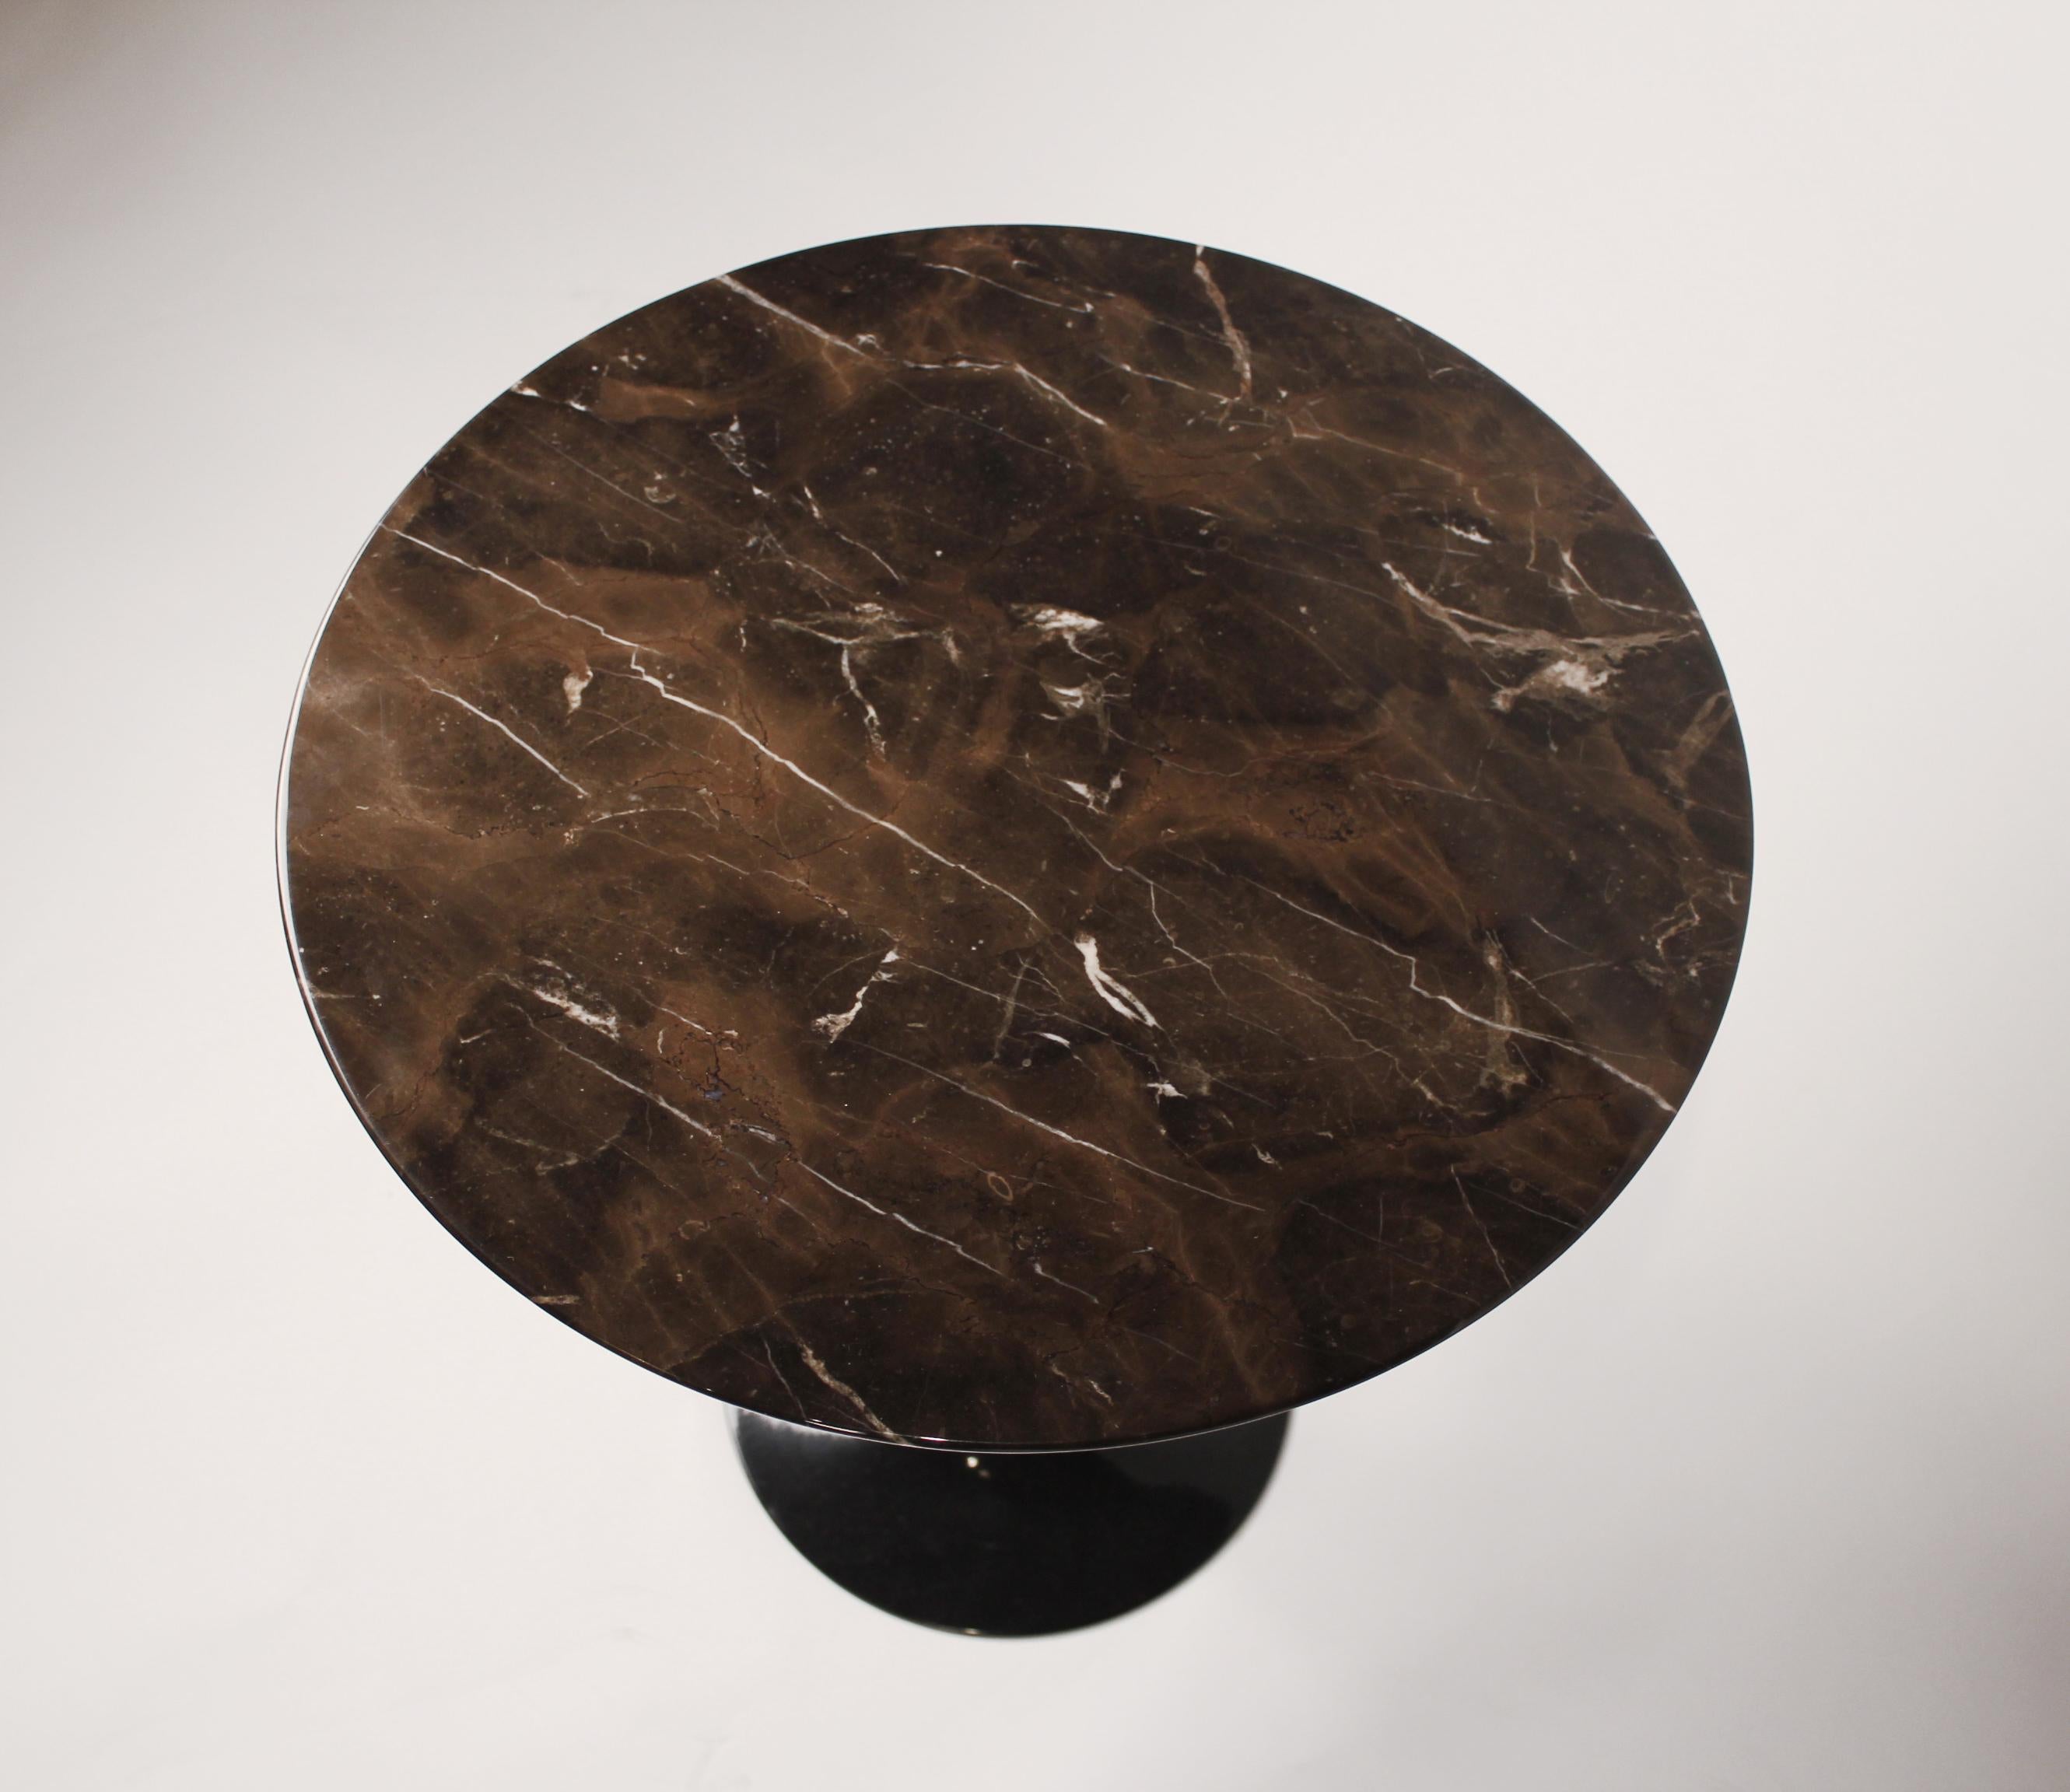 American Eero Saarinen Side Table for Knoll with Polished Espresso Marble Top